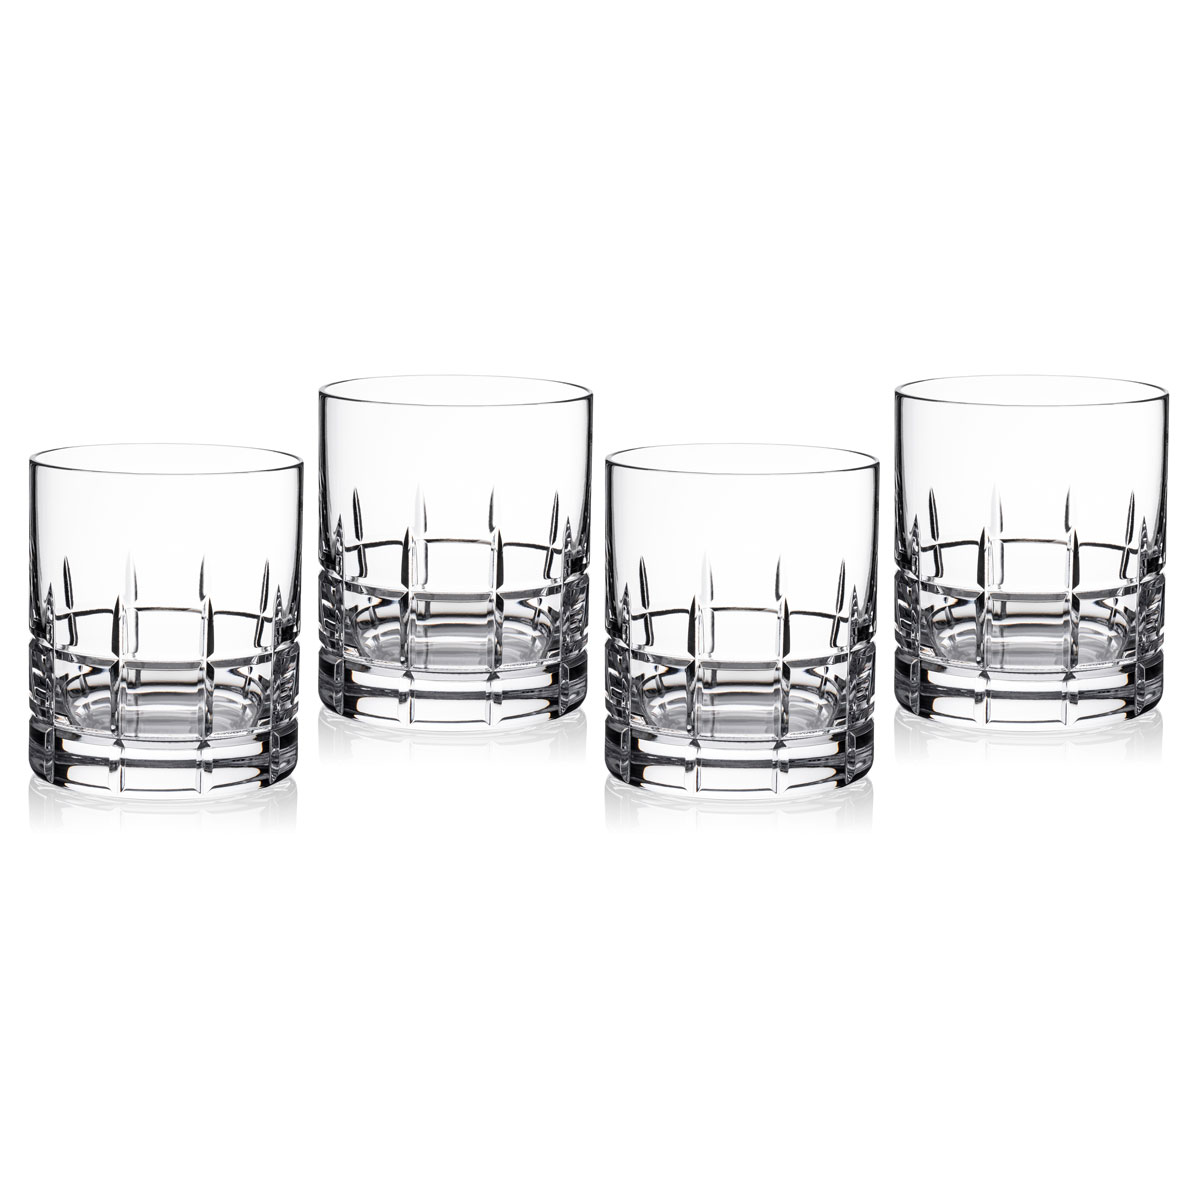 Marquis by Waterford Harper Old Fashioned Tumbler Set of 4